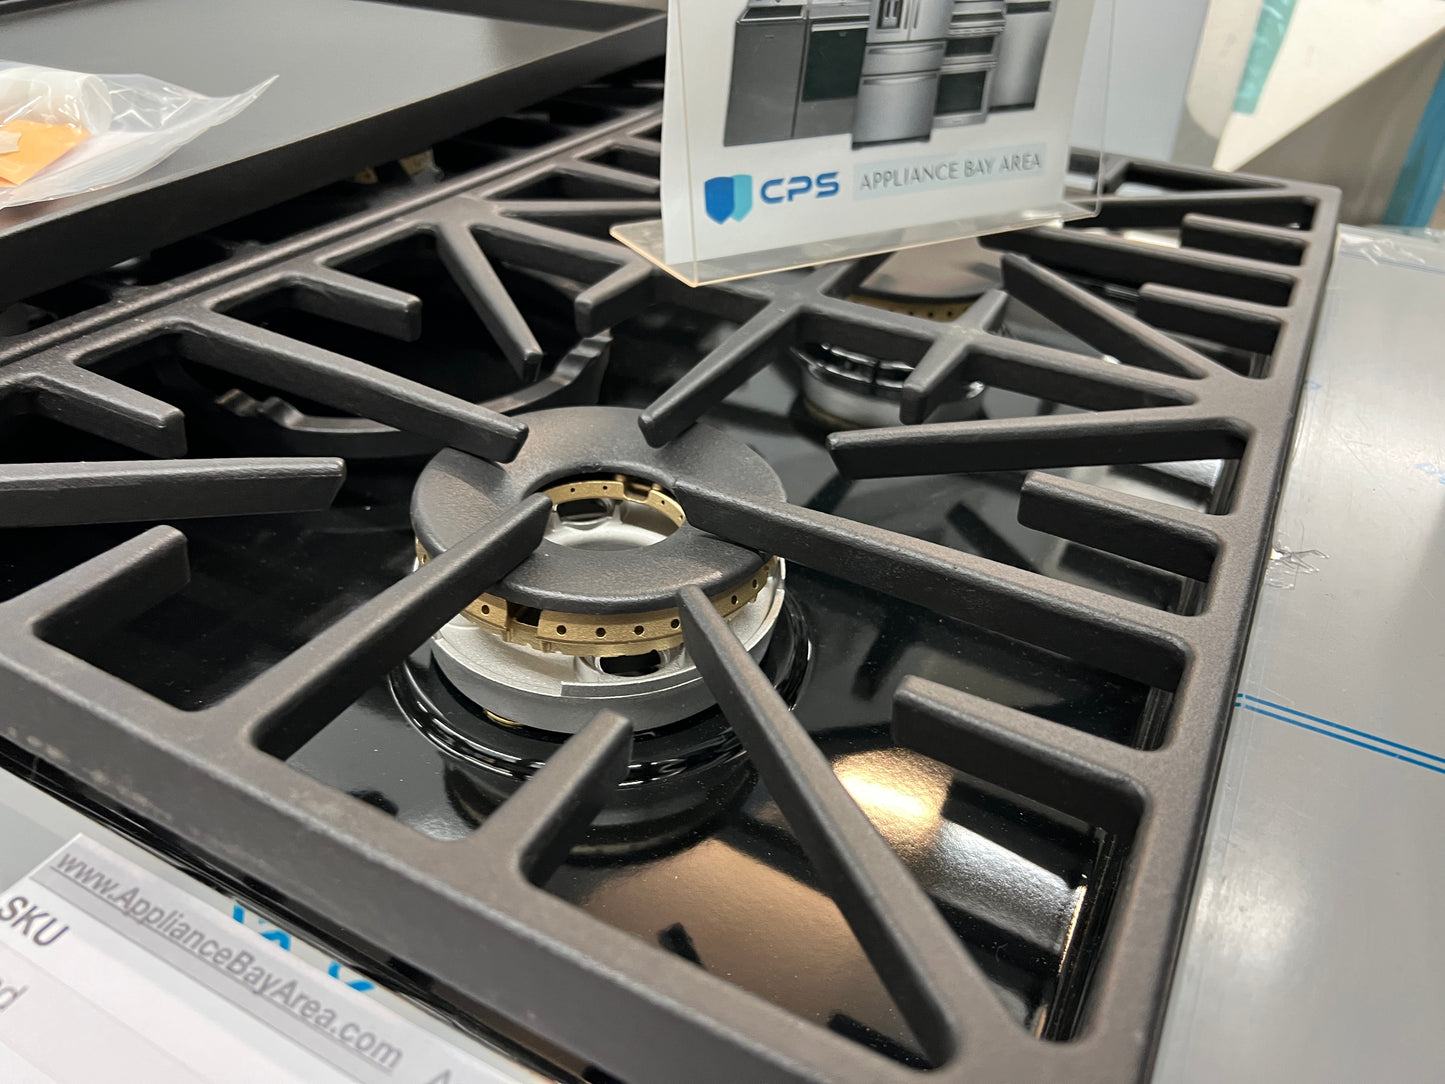 Dacor 48 Inch Gas Rangetop HRTP486S 6 Sealed Burners, Continuous Grates, Simmer Sear Burners, Perma-Flame, Illumina Knobs, SmartFlame Technology, and Griddle,369006